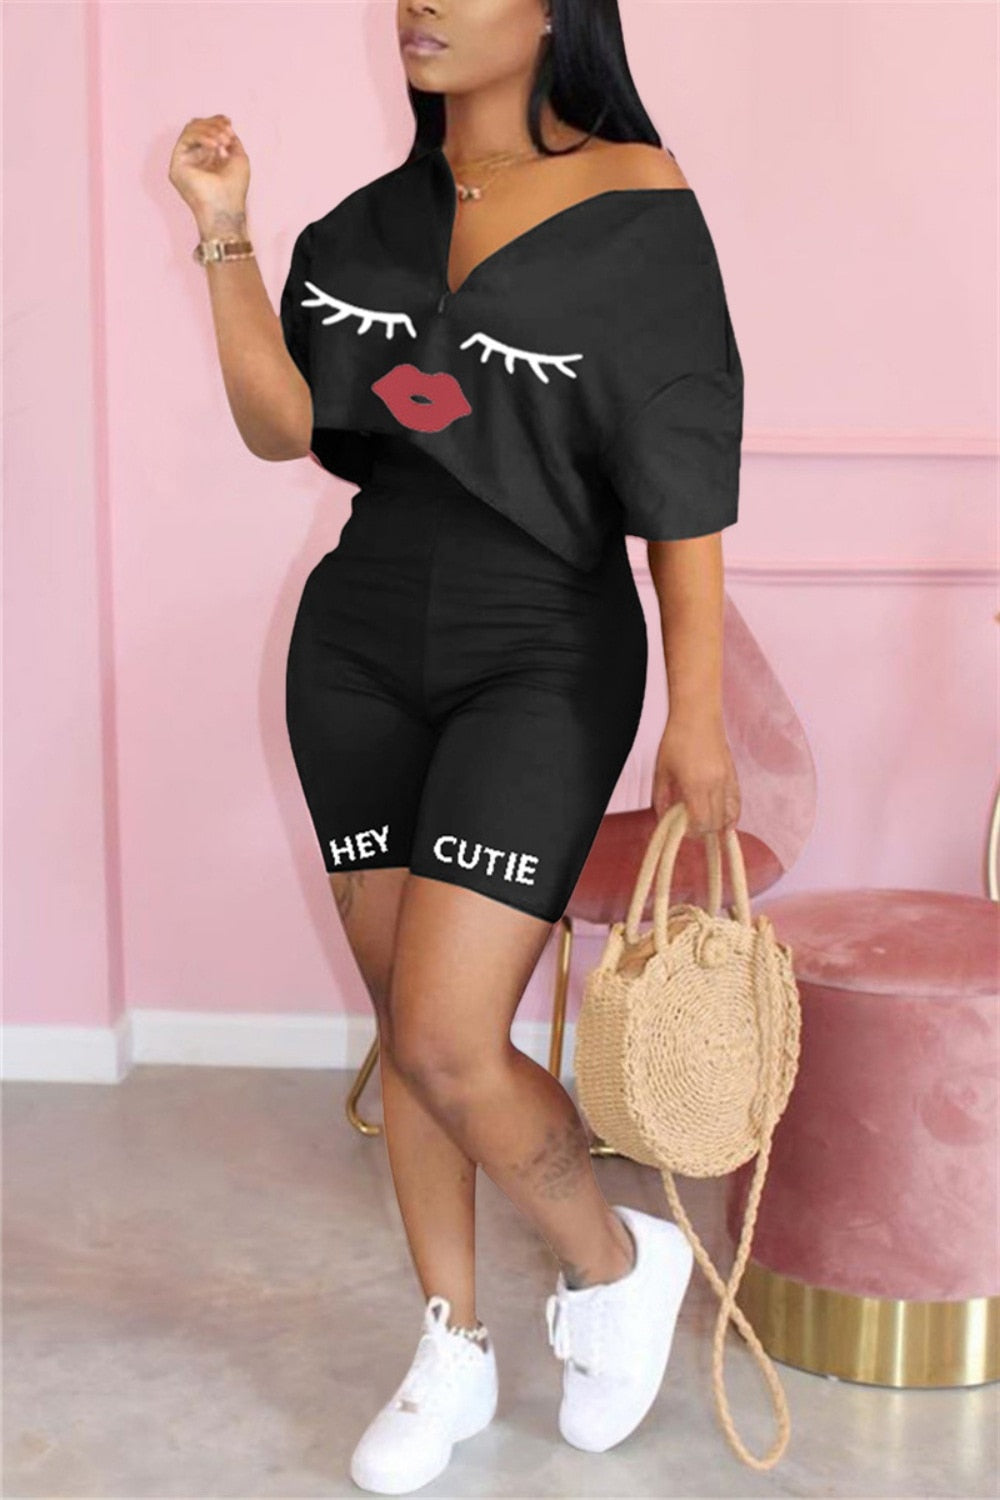 Casual 2 Piece Set Women Tracksuit Summer Outfits Loose Top Biker Shorts Sweat Suits Lounge Wear Two Piece Matching Sets